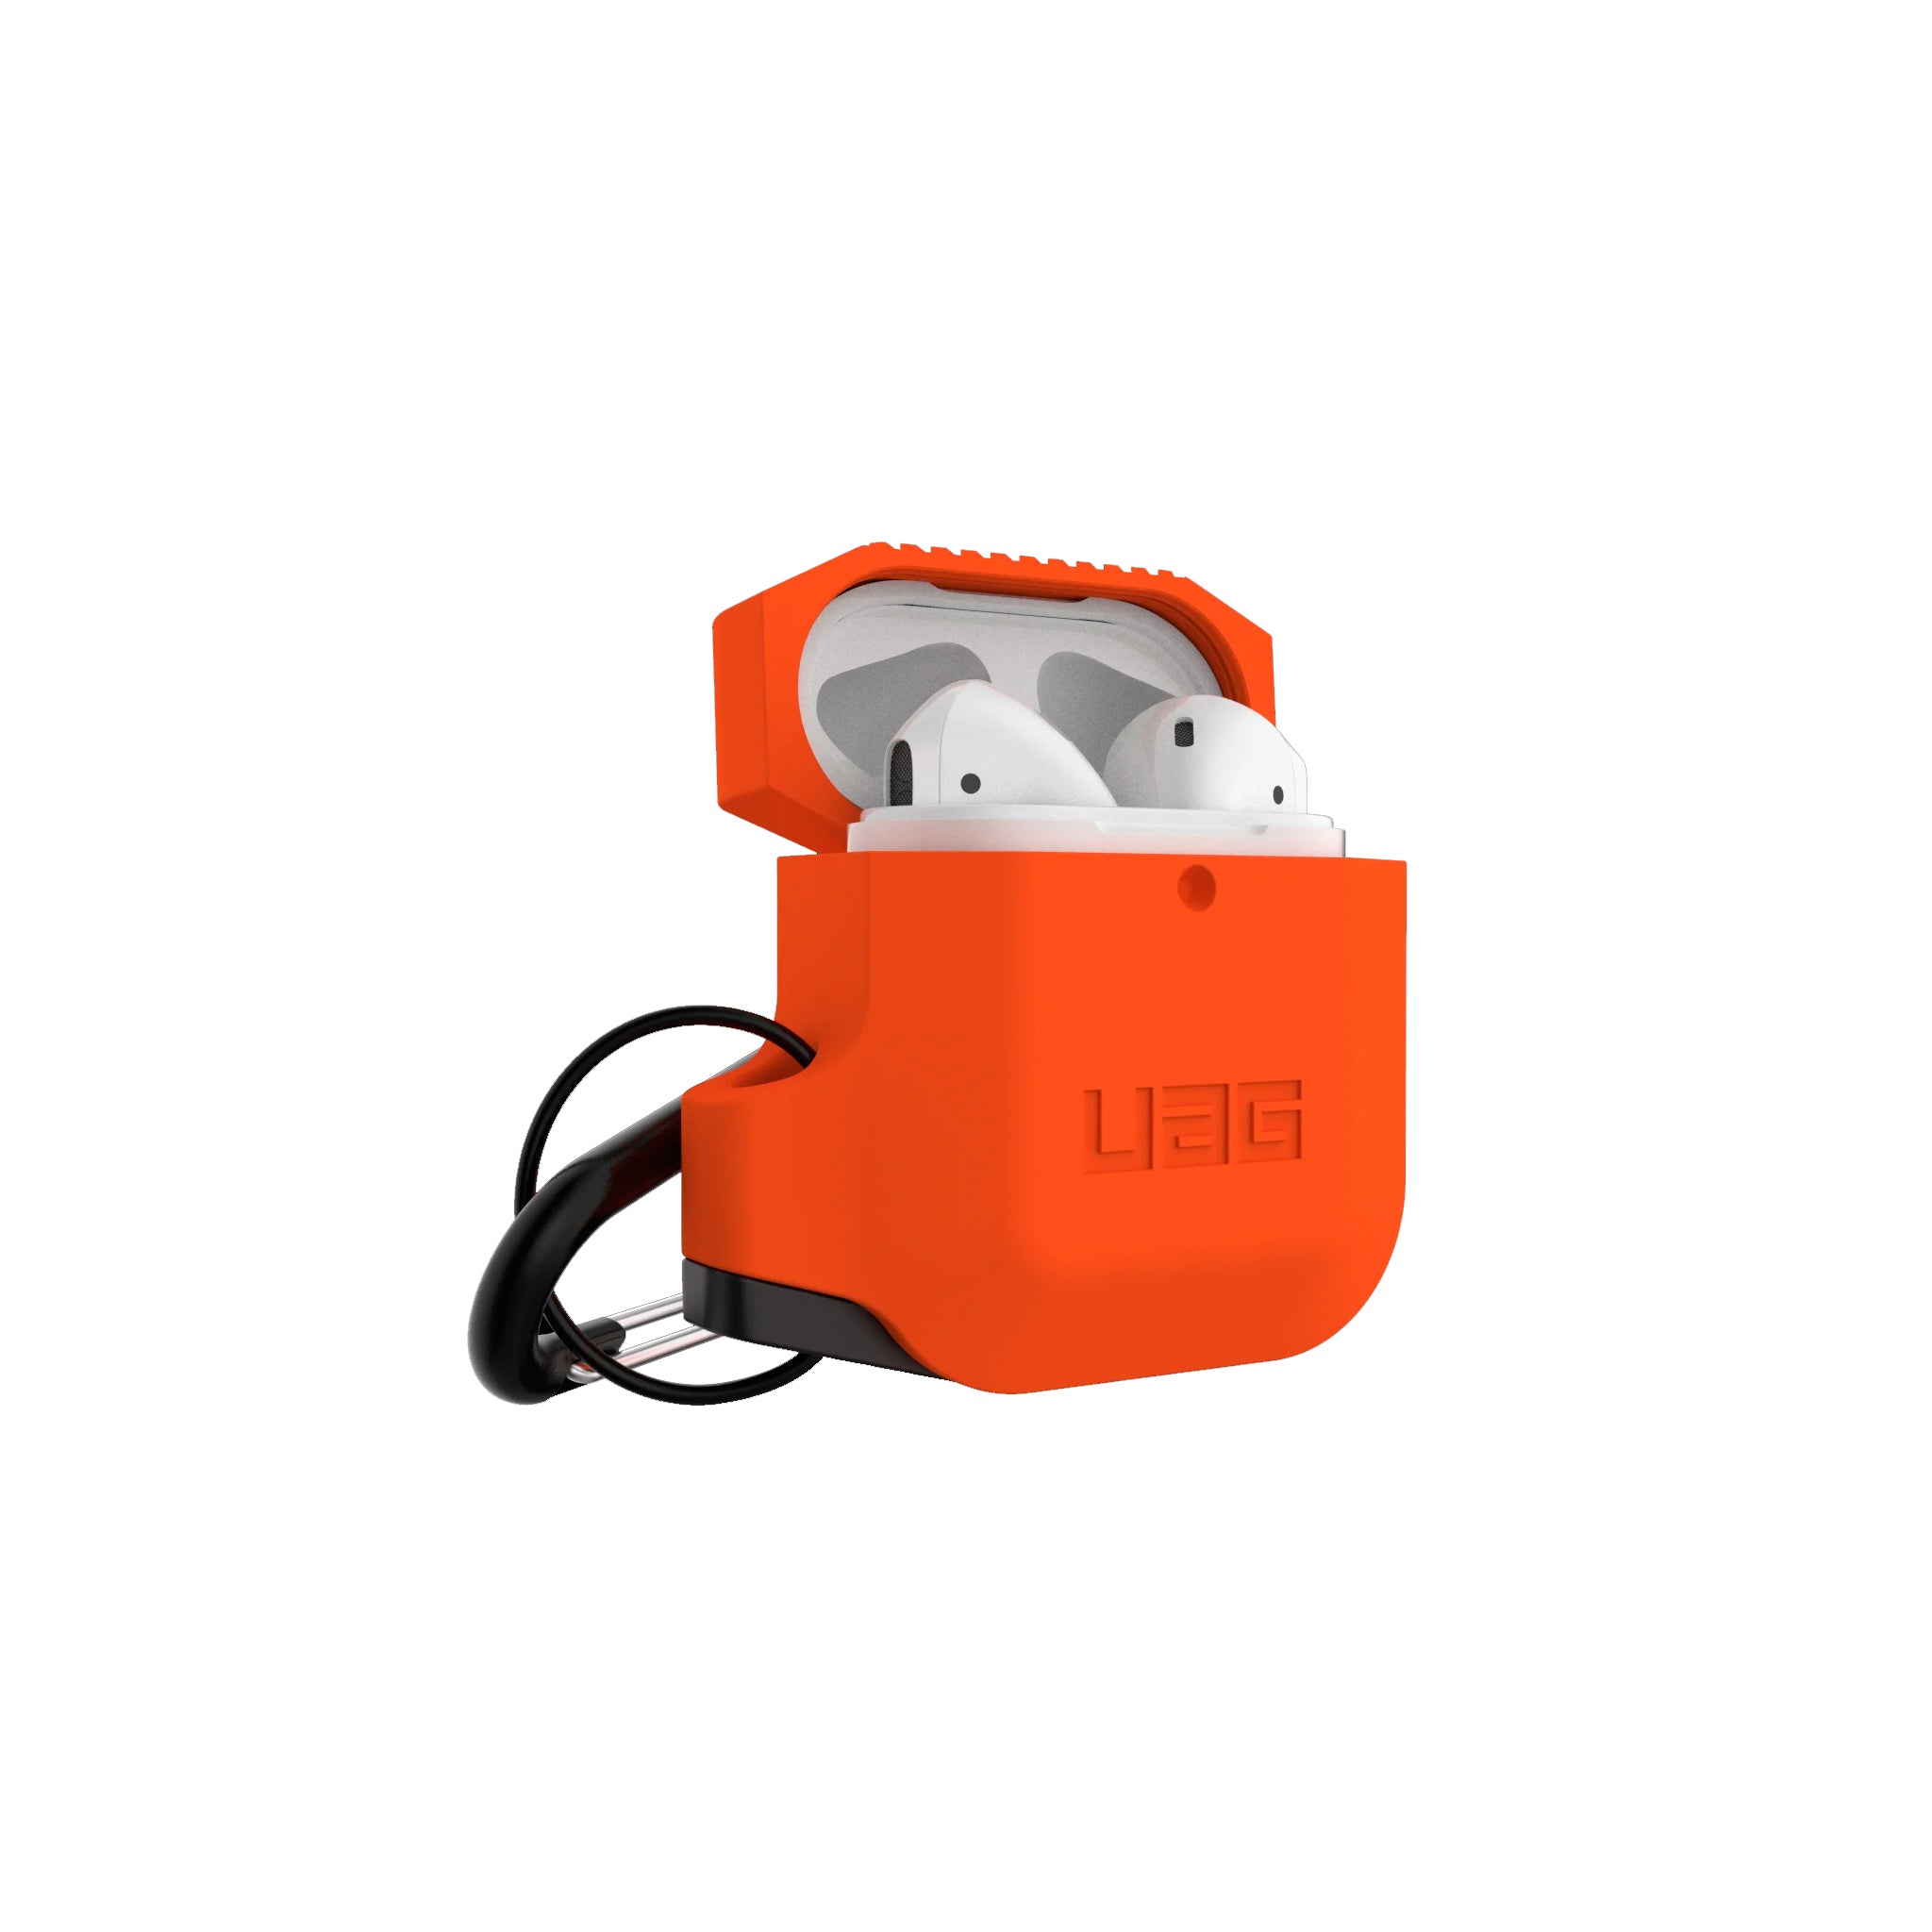 Urban Armor Gear (uag) - Silicone Case For Apple Airpods - Orange And Gray